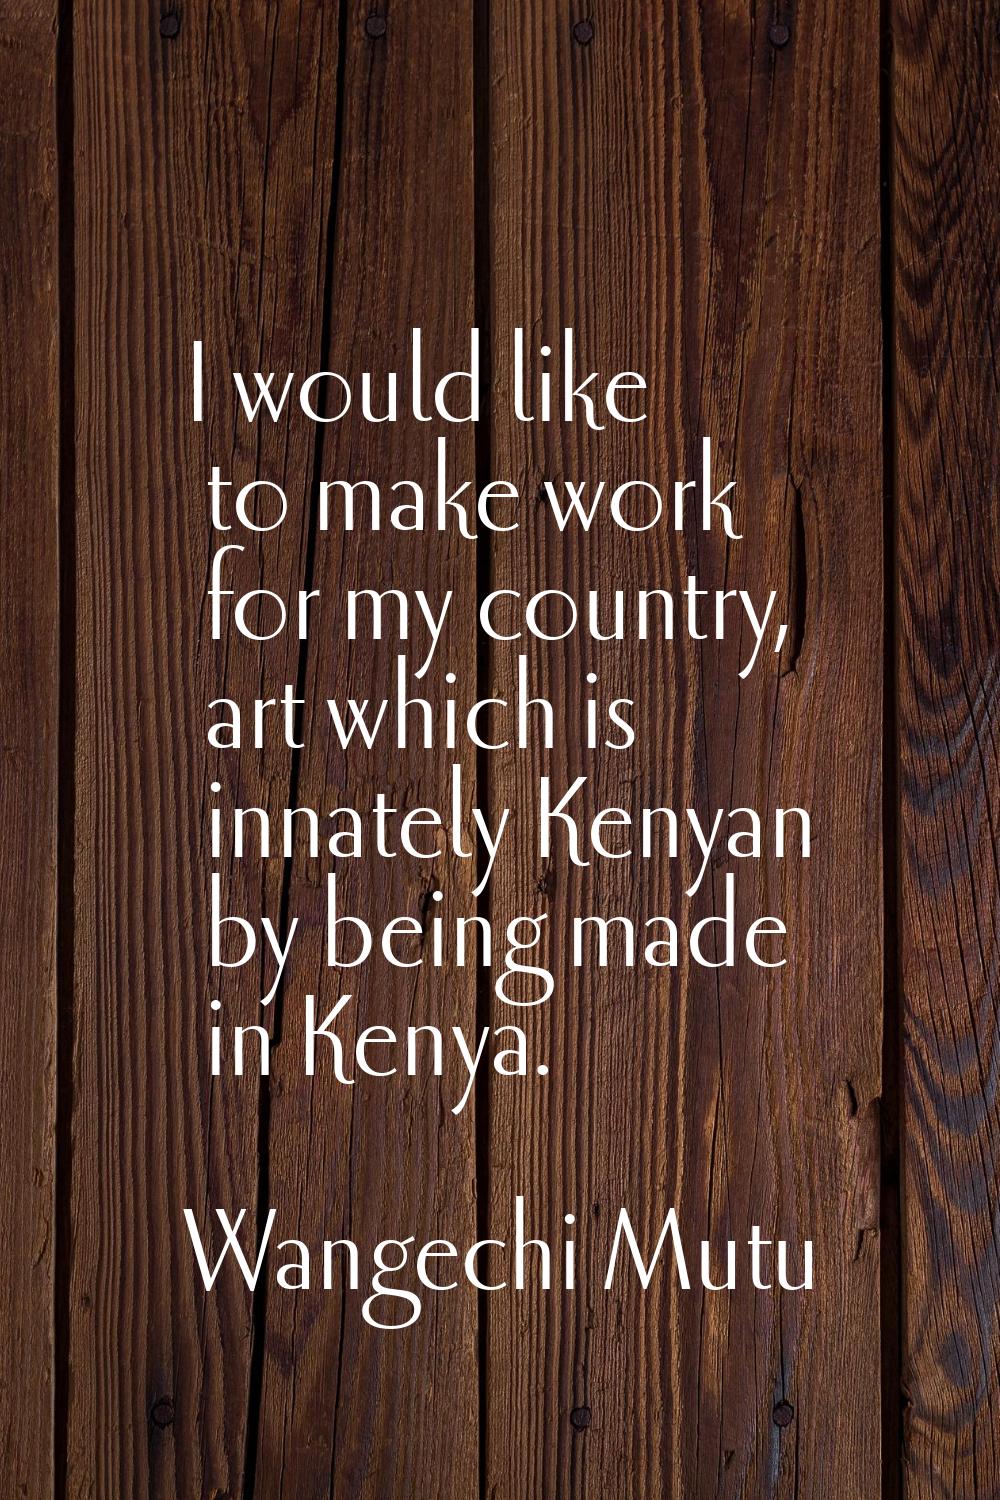 I would like to make work for my country, art which is innately Kenyan by being made in Kenya.